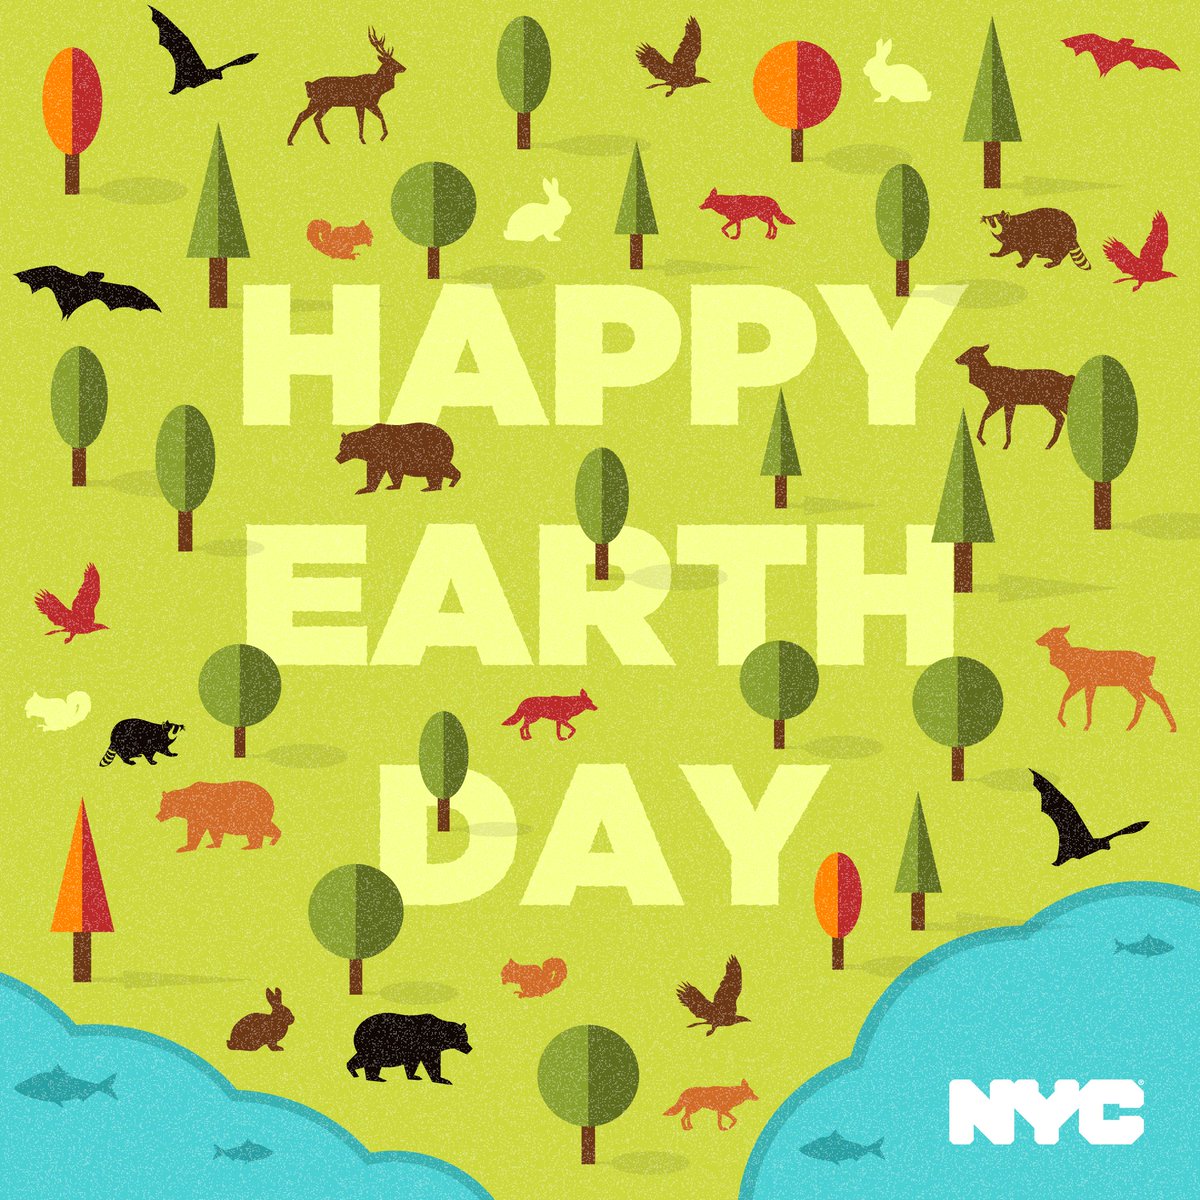 Happy #EarthDay! Here in New York City, we're leading the way in creating a cleaner, greener city. From expanded green spaces and major investments in electric vehicles to our groundbreaking Green Economy Action Plan, the Big Apple is planting seeds for a brighter future.